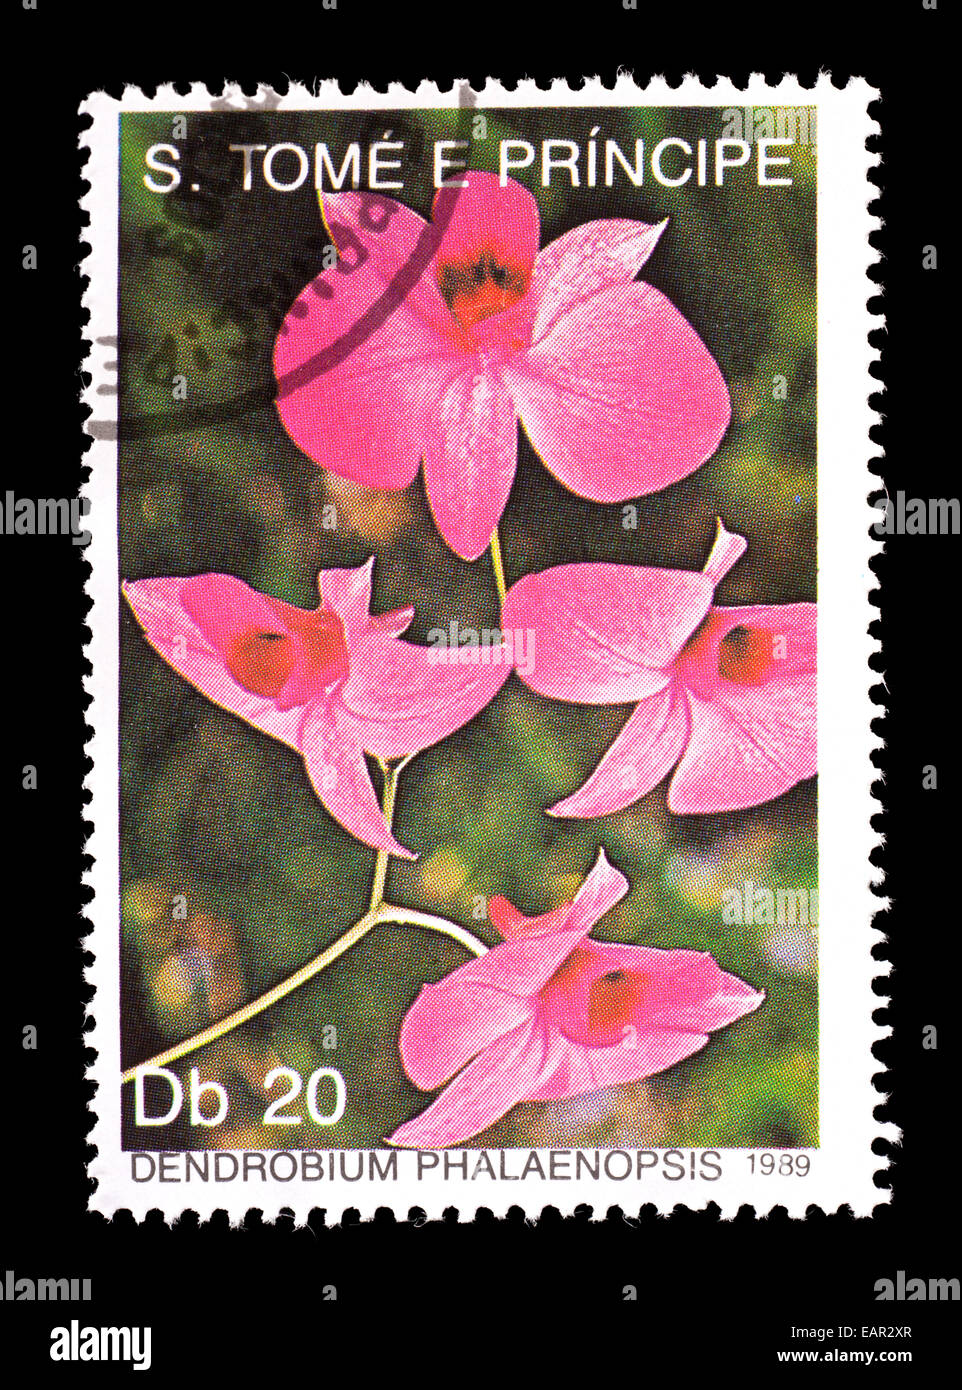 Postage stamp from Saint Thomas and Prince islands depicting orchids (Dendrobium phalaenopsis) Stock Photo